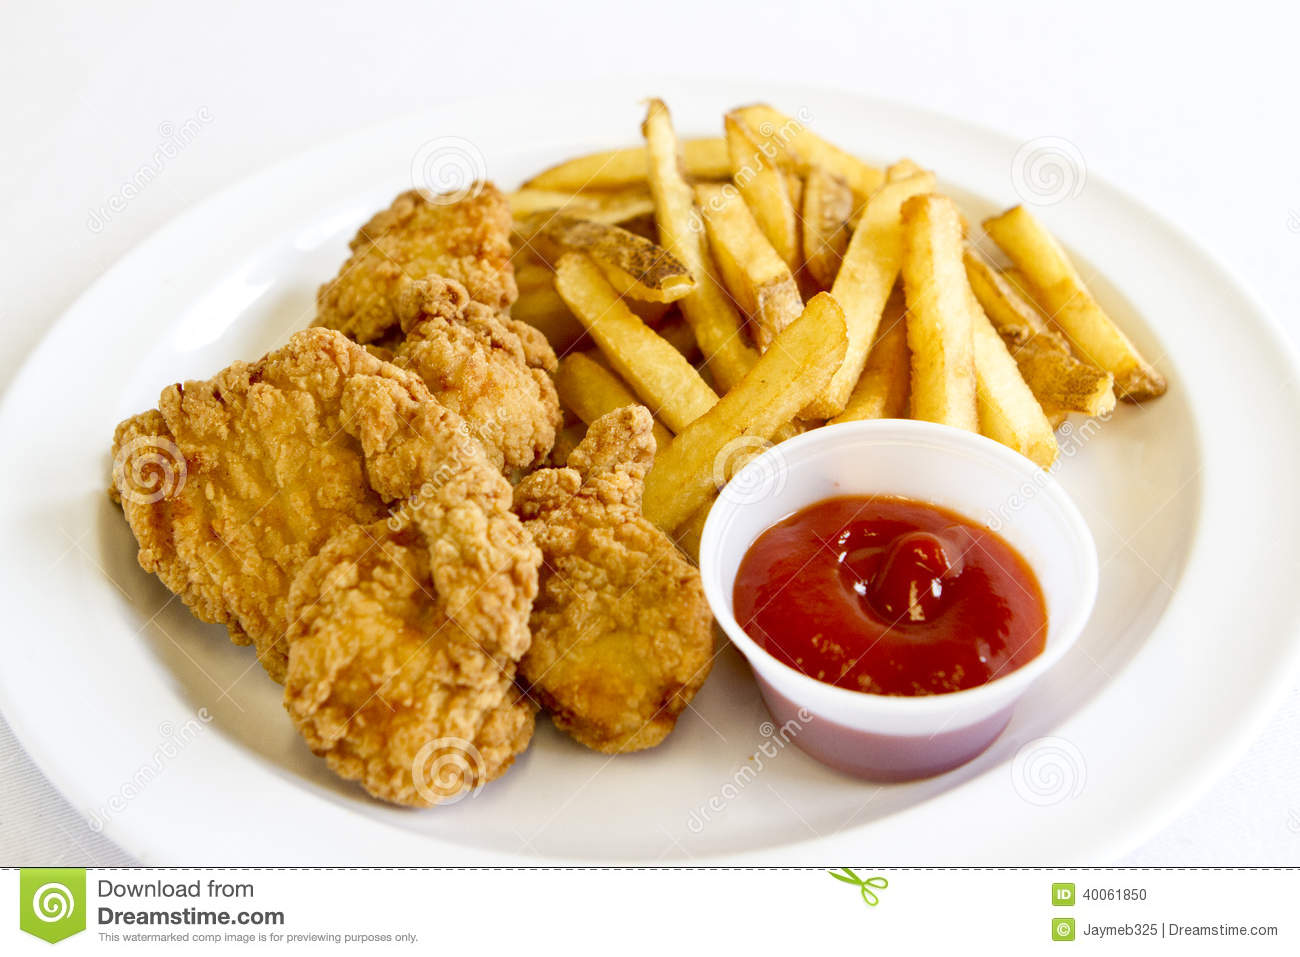 Chicken Tenders And Fries Stock Photo   Image  40061850